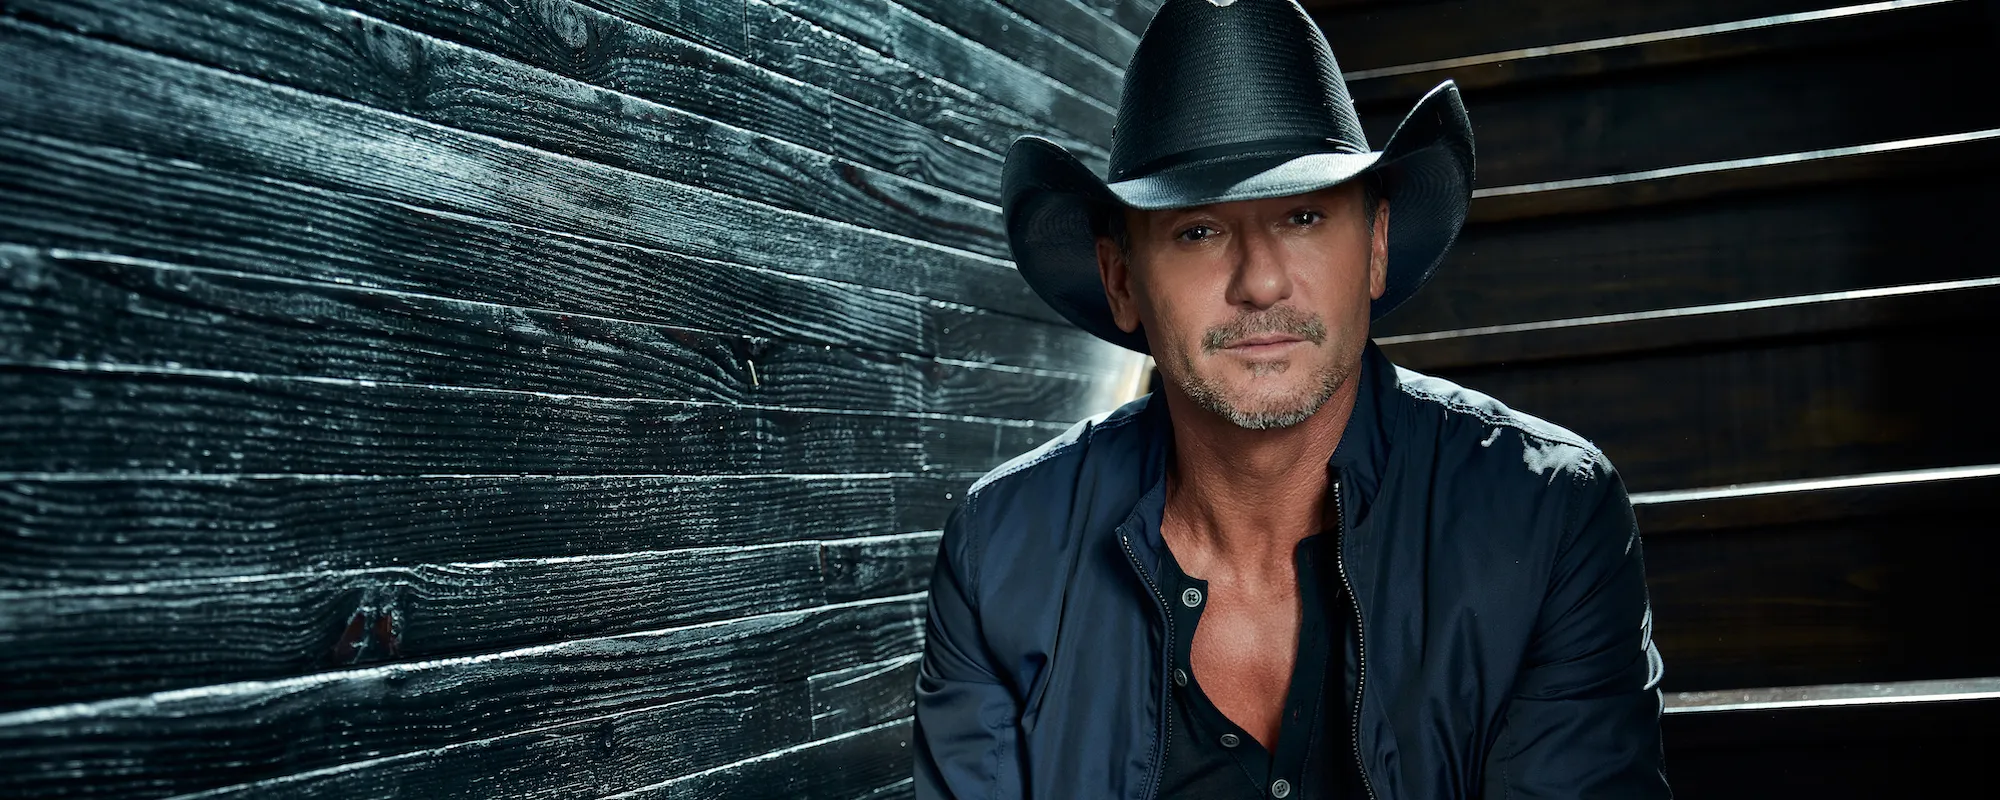 Tim McGraw Details 17th Album, Shares Story of Sobriety with “Hey Whiskey”